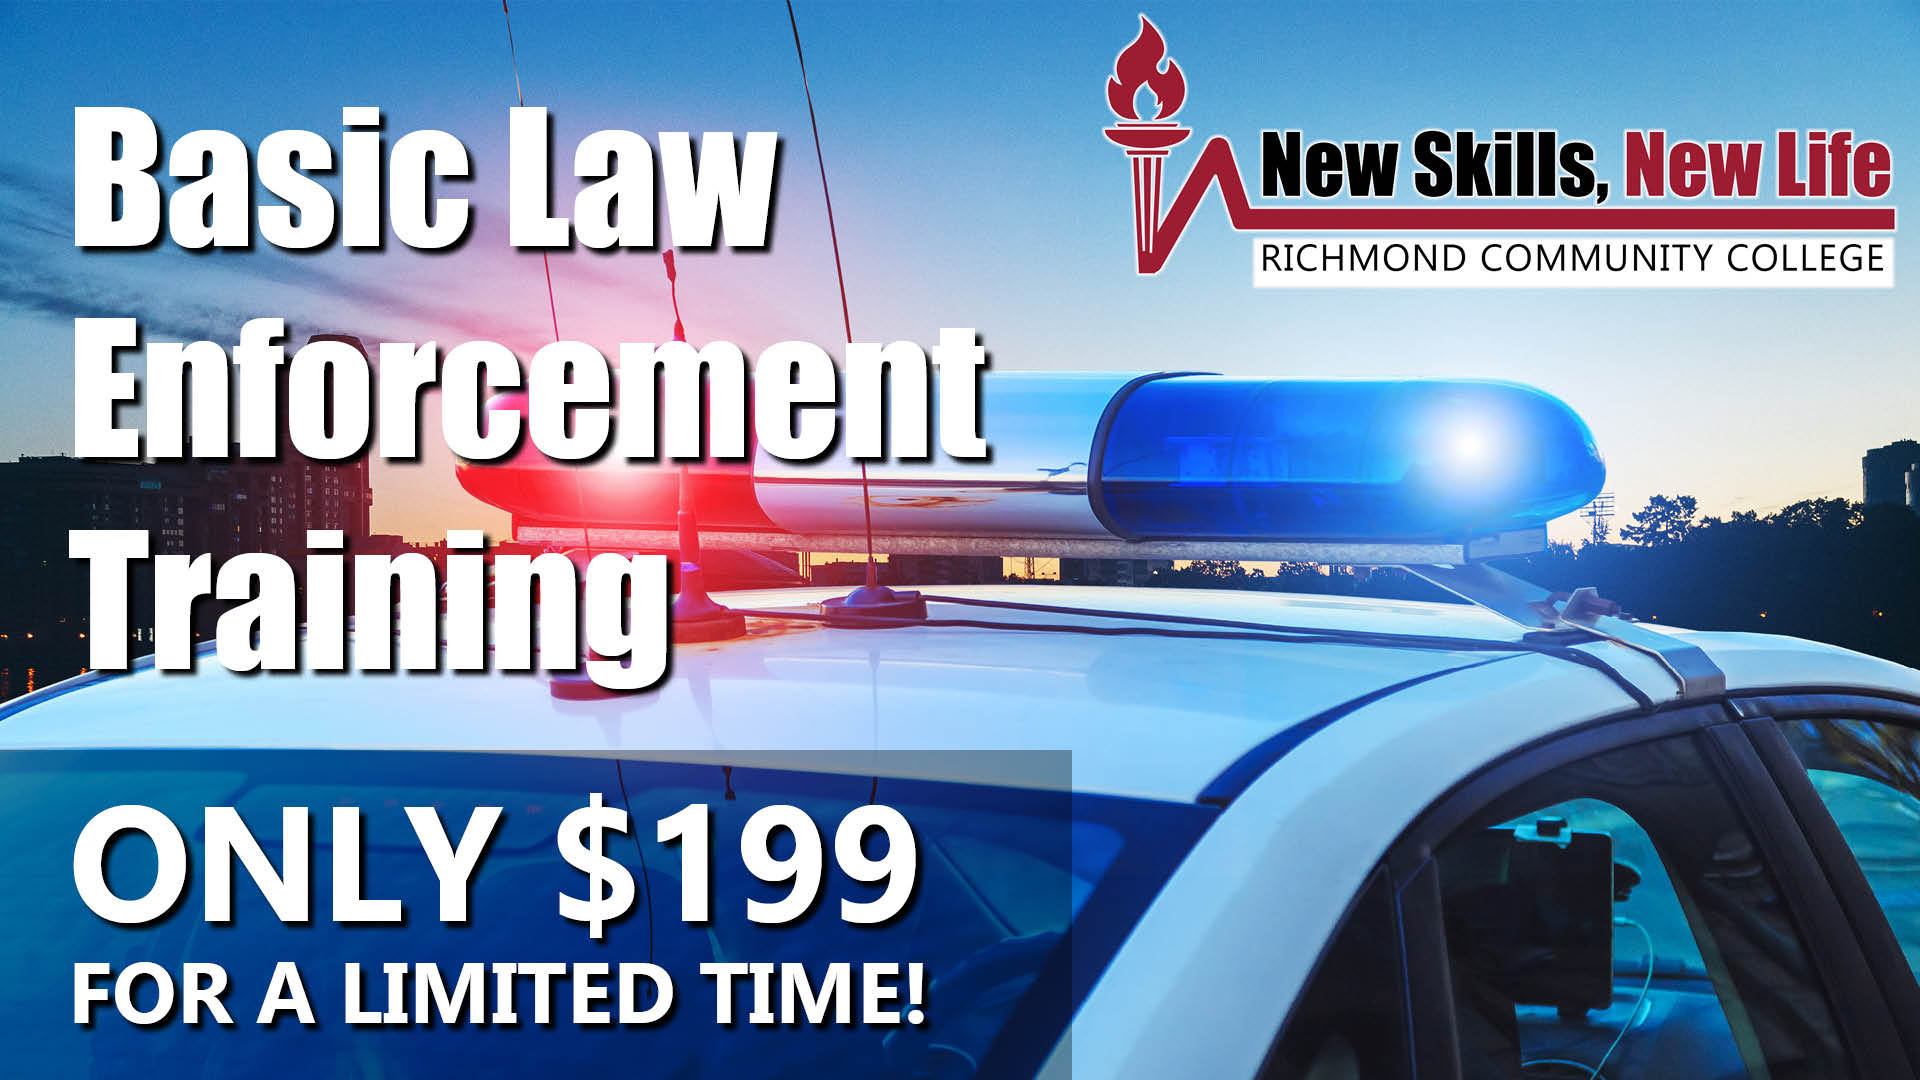 Basic Law Enforcement Training only $199 for a limited time.